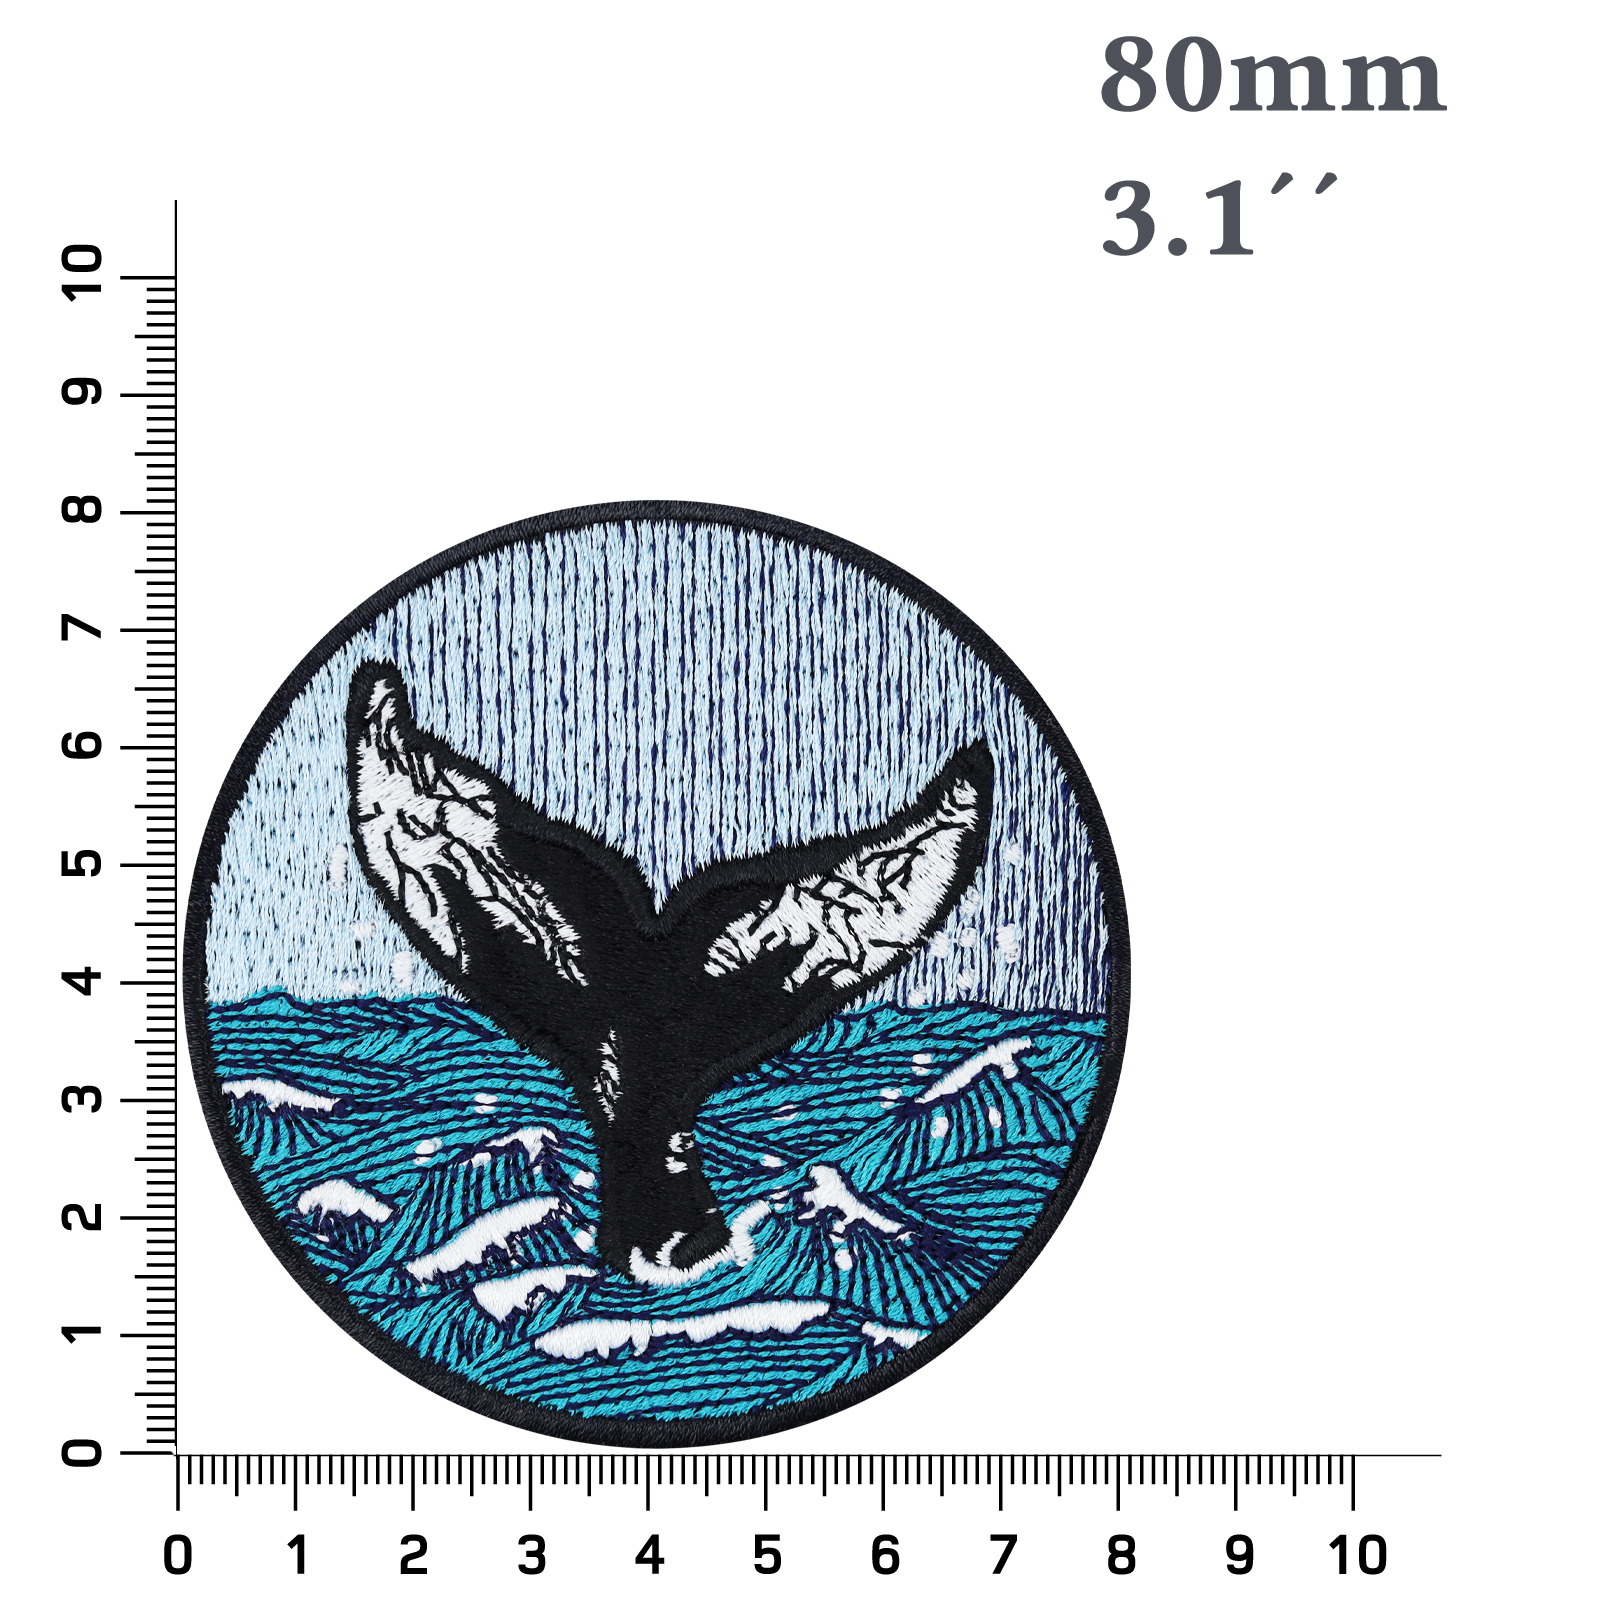 Walflosse Orca - Patch